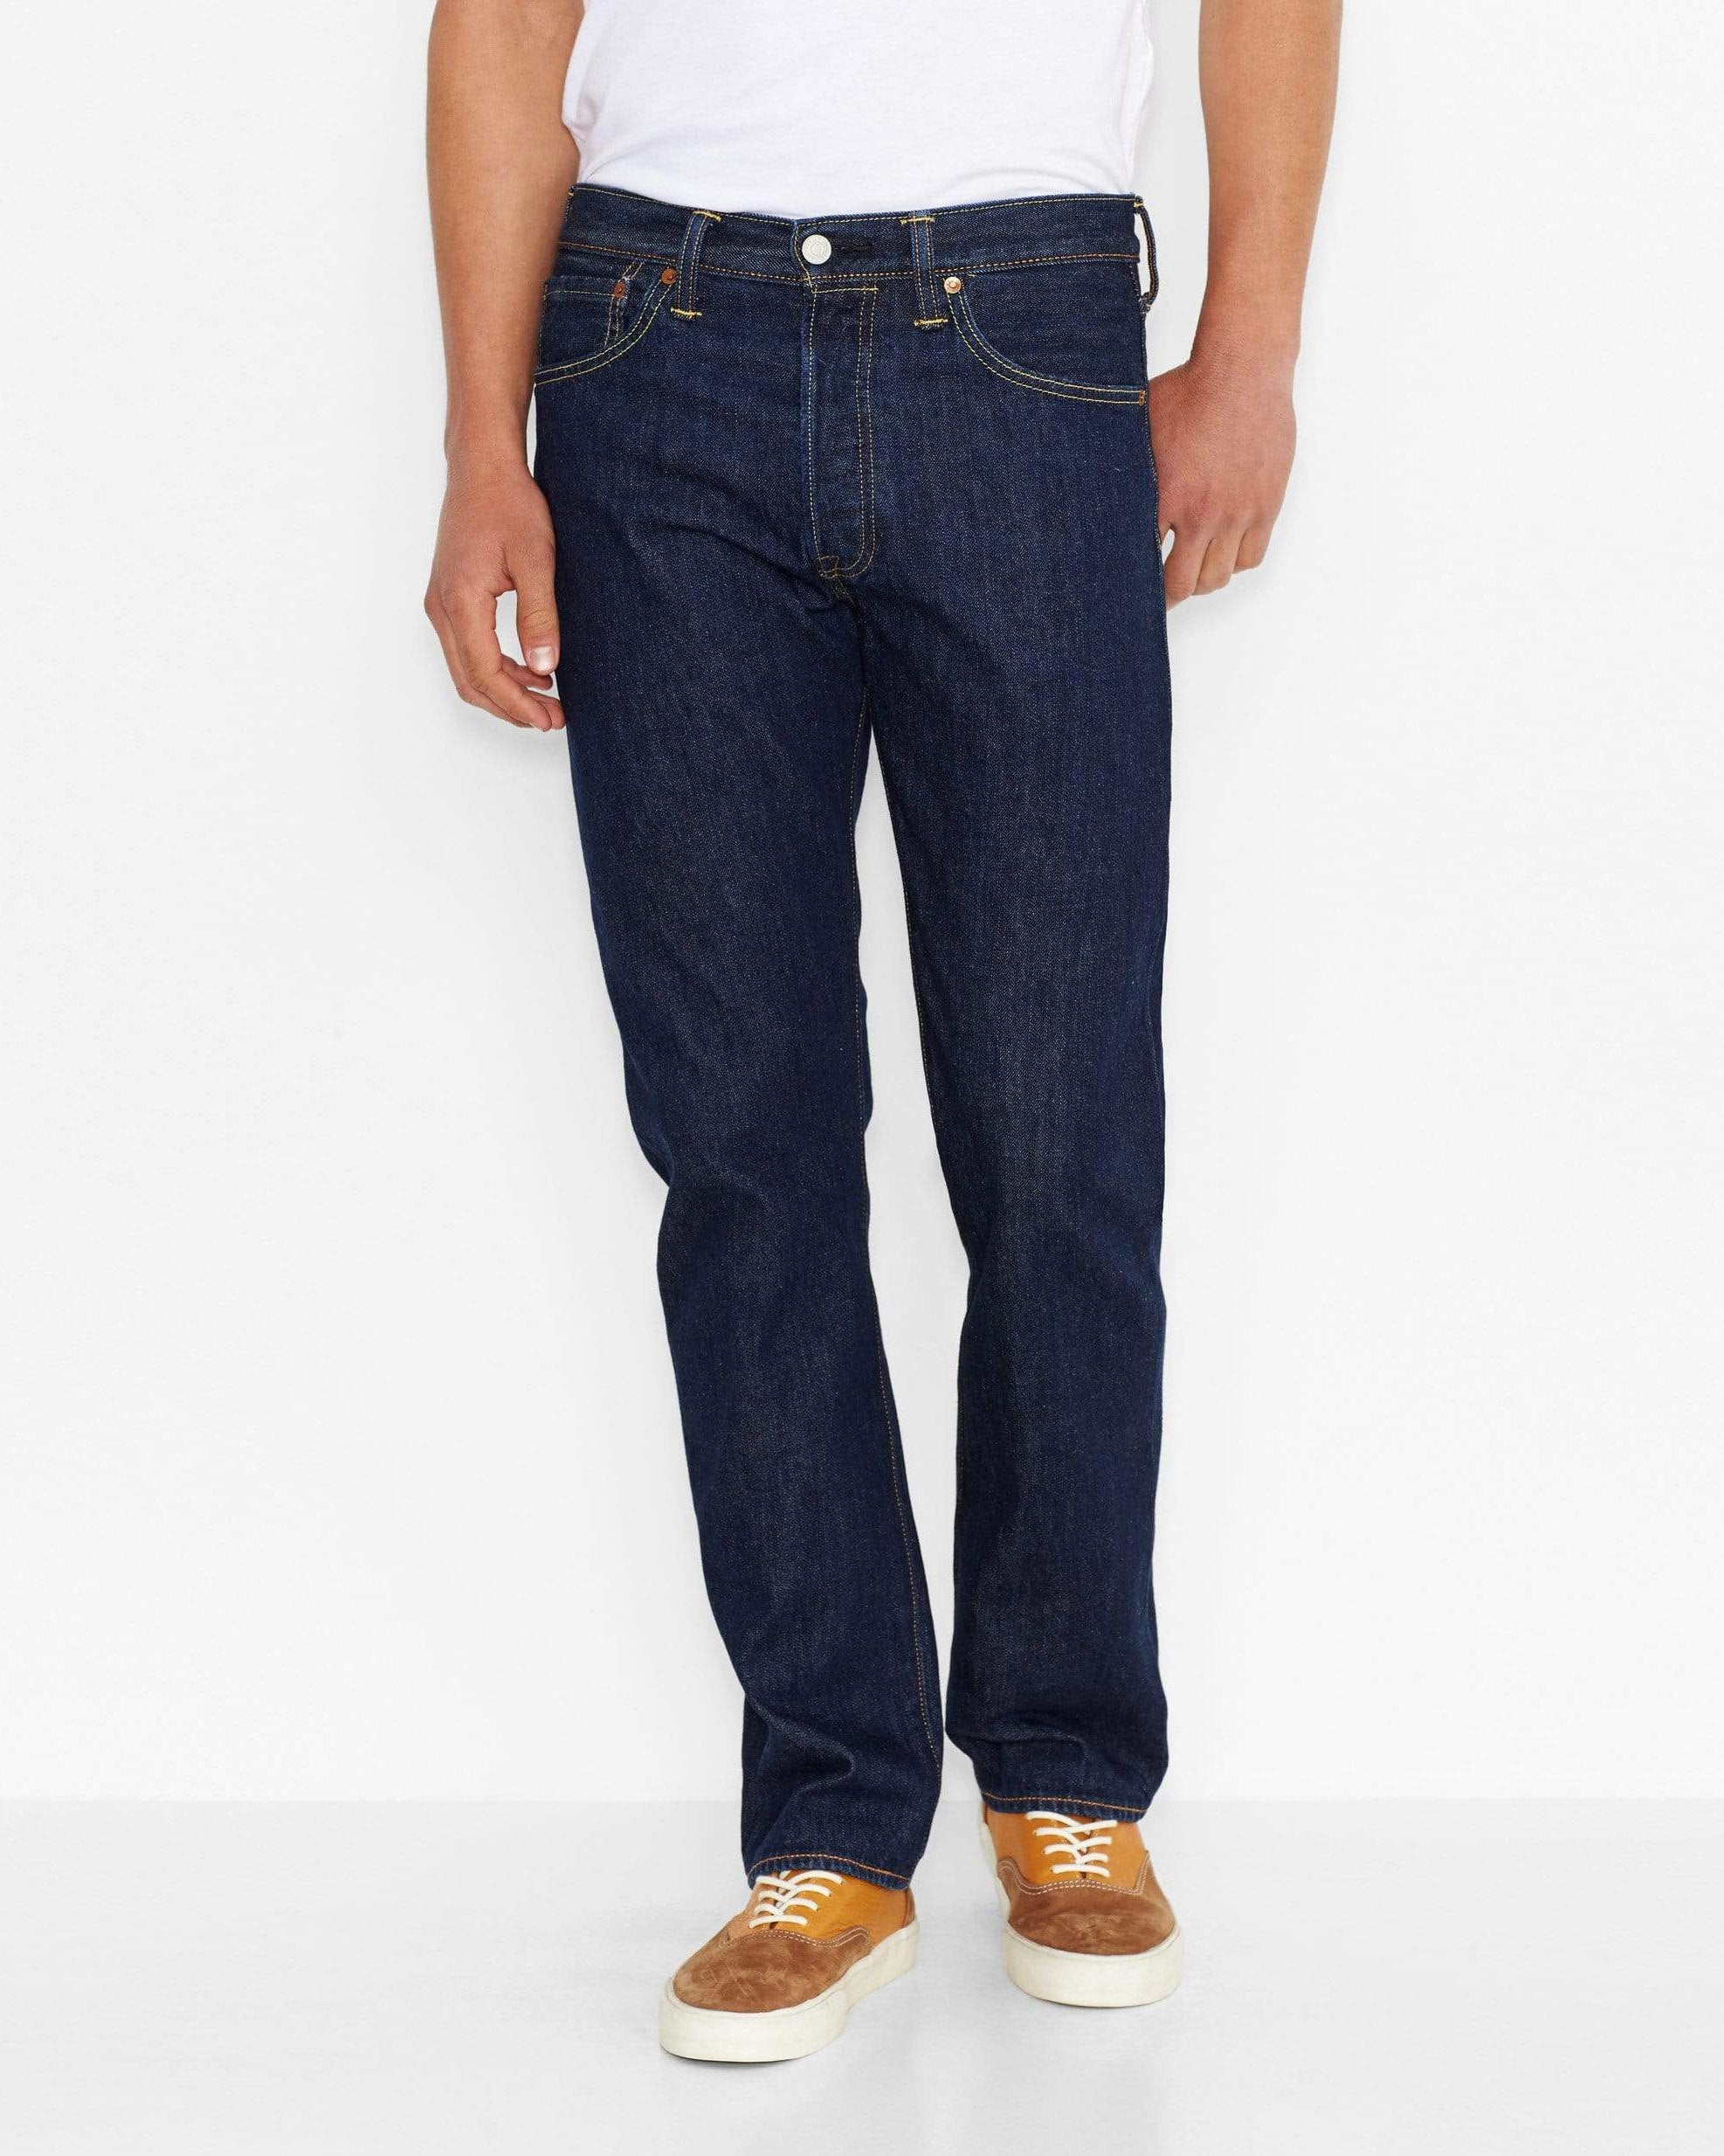 levis one wash jeans